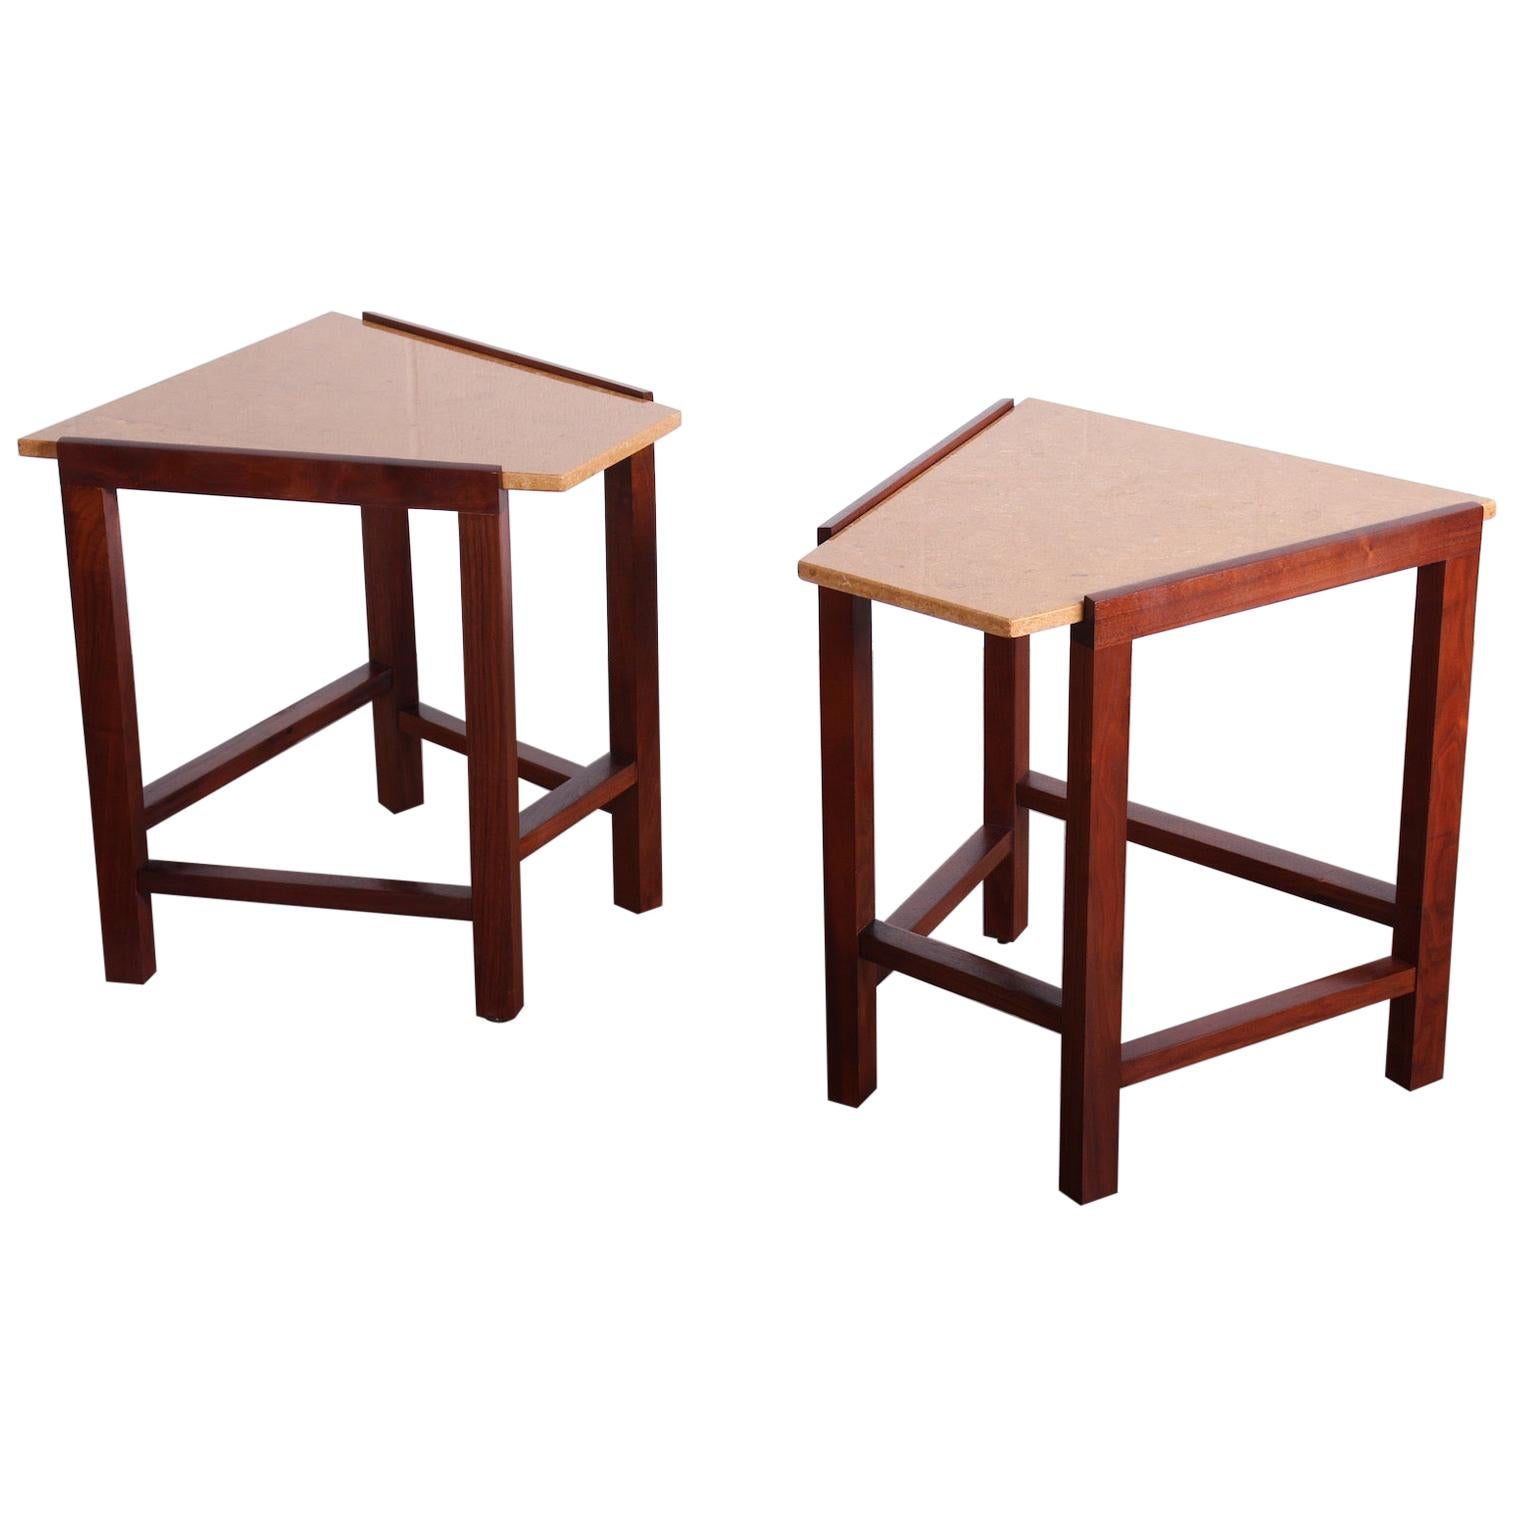 Pair of Stone Top Dunbar Wedge Tables For Sale